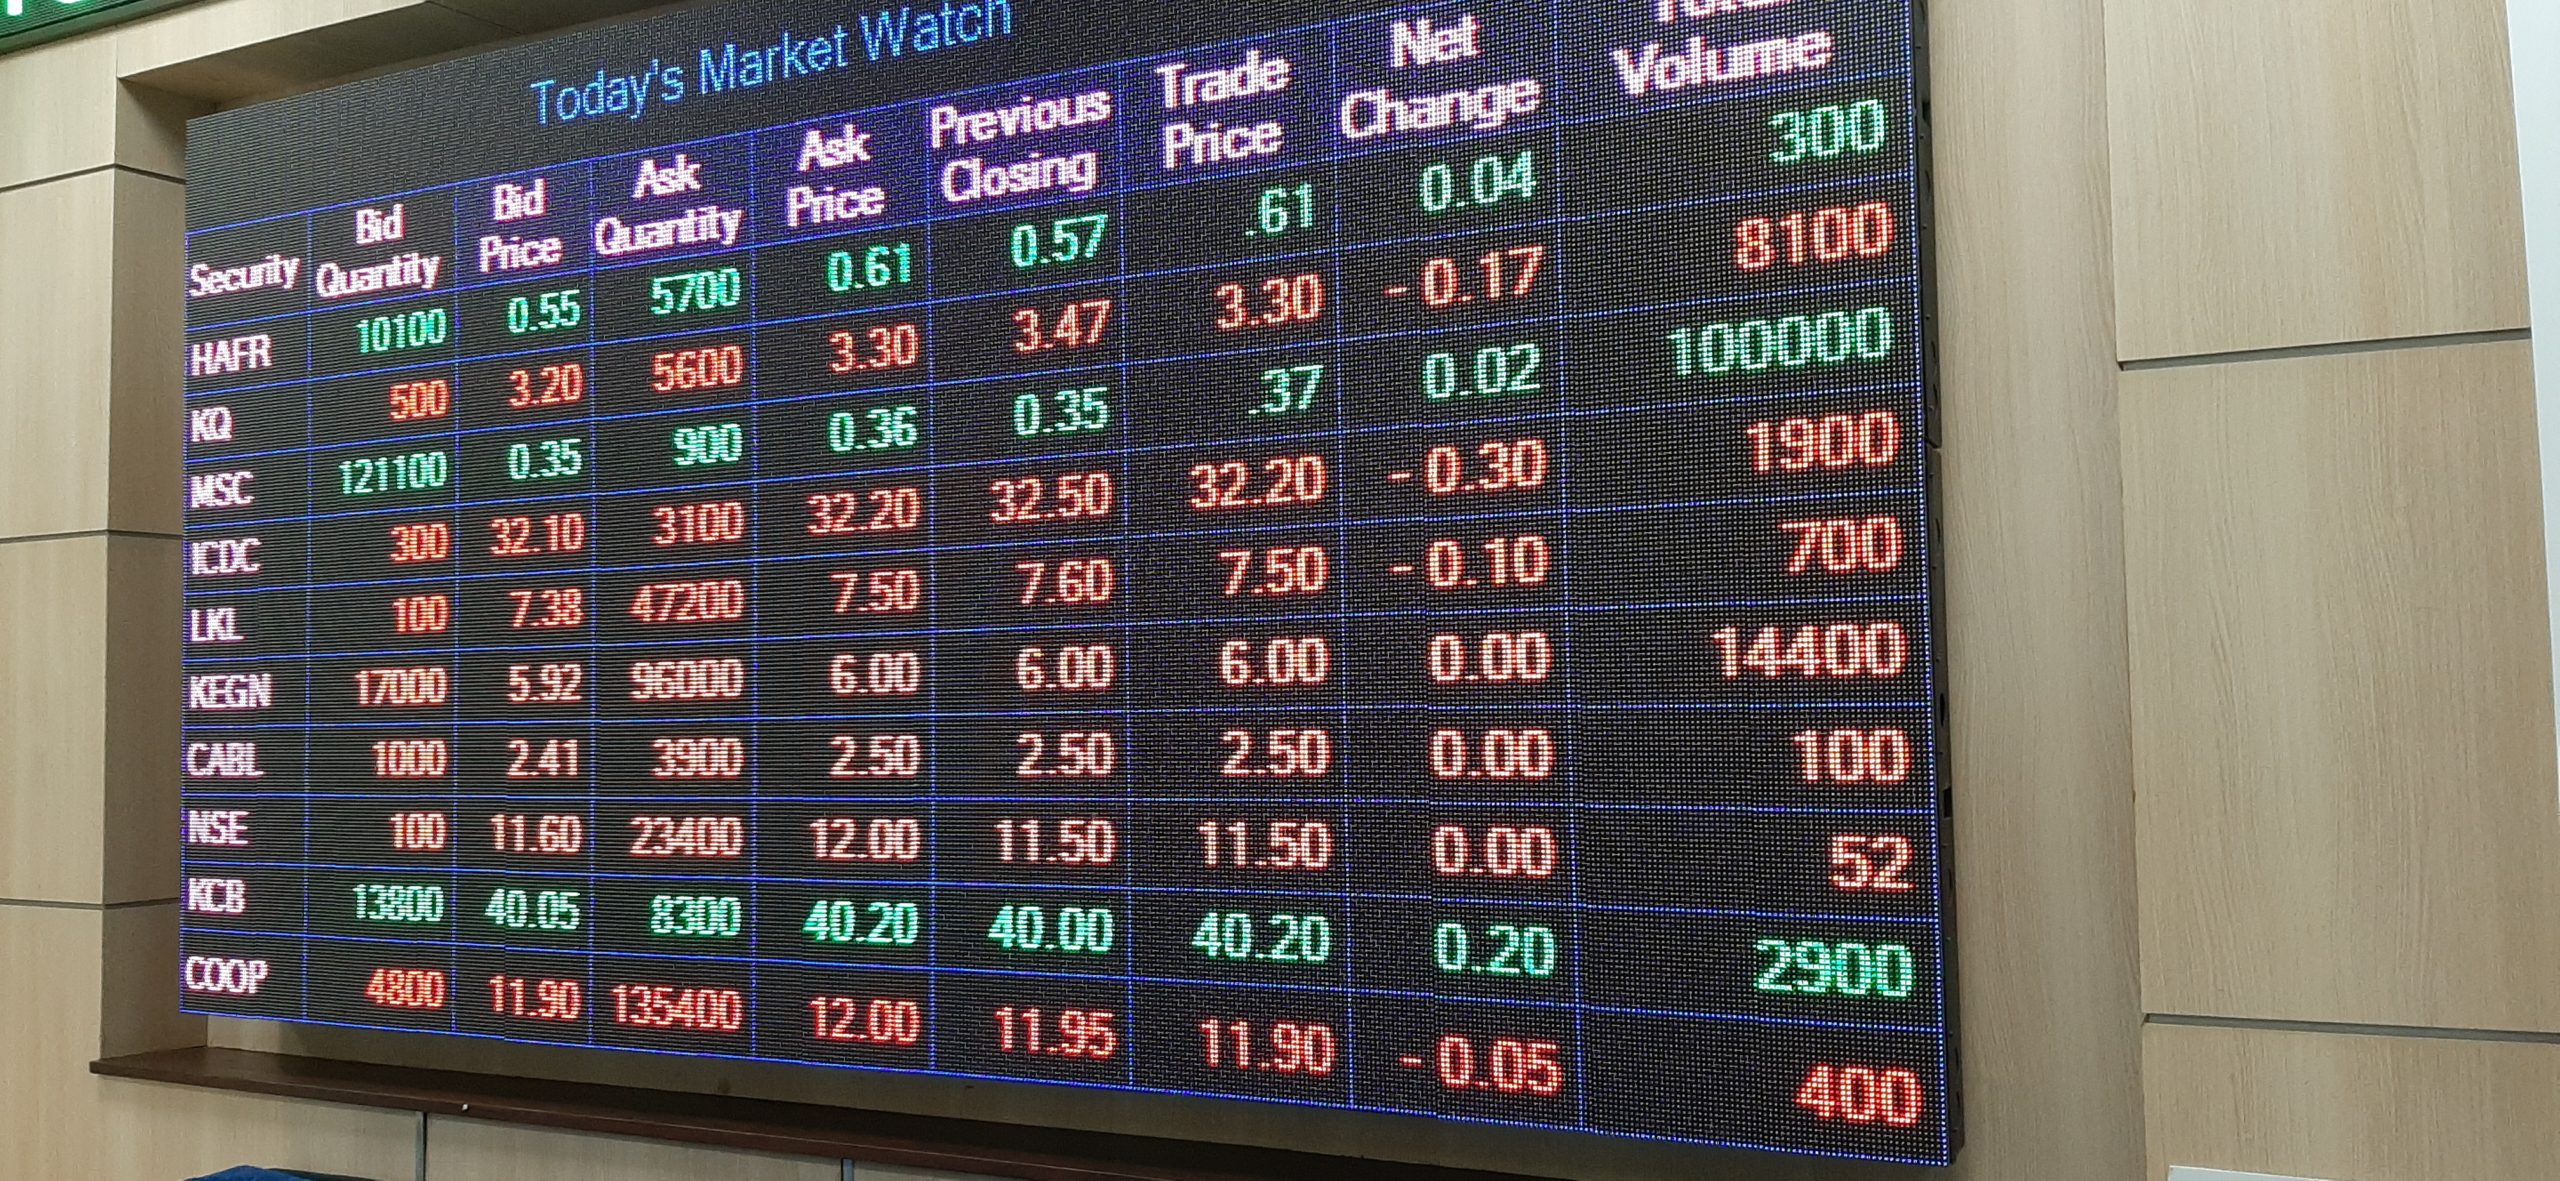 Foreign investors end a 7 month sell-off run at the NSE